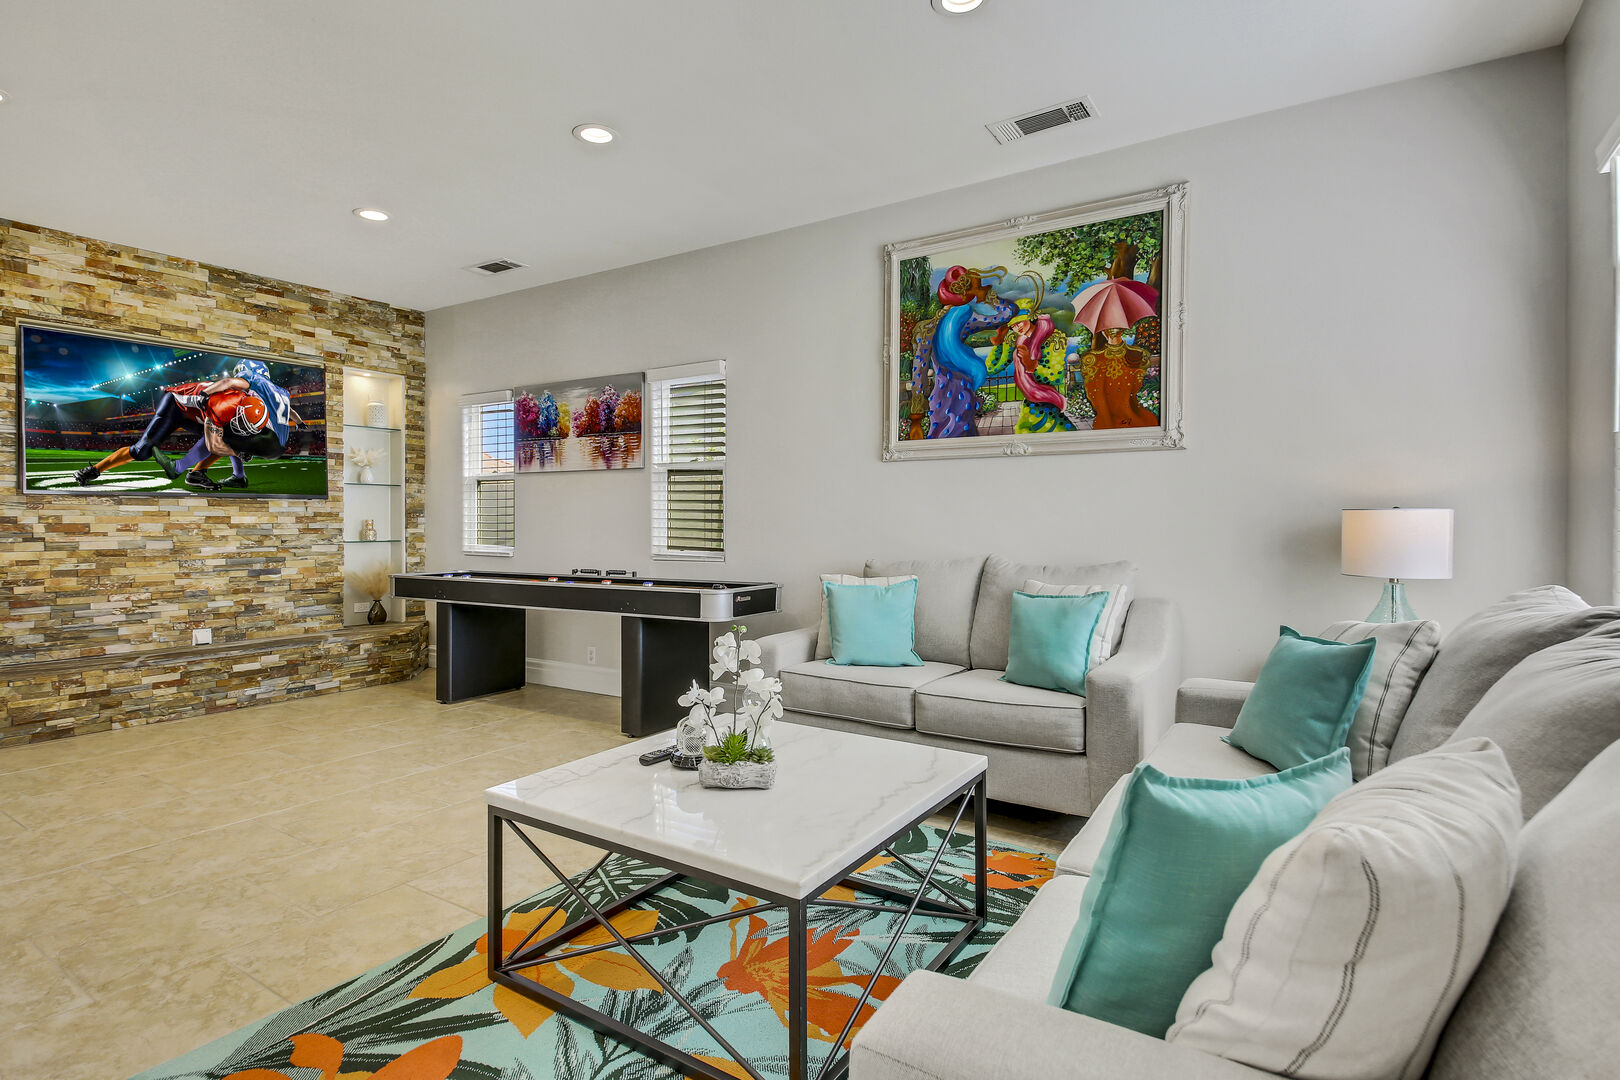 The family room provides ample space for relaxation in front of a 70-inch Samsung 4K Smart television.